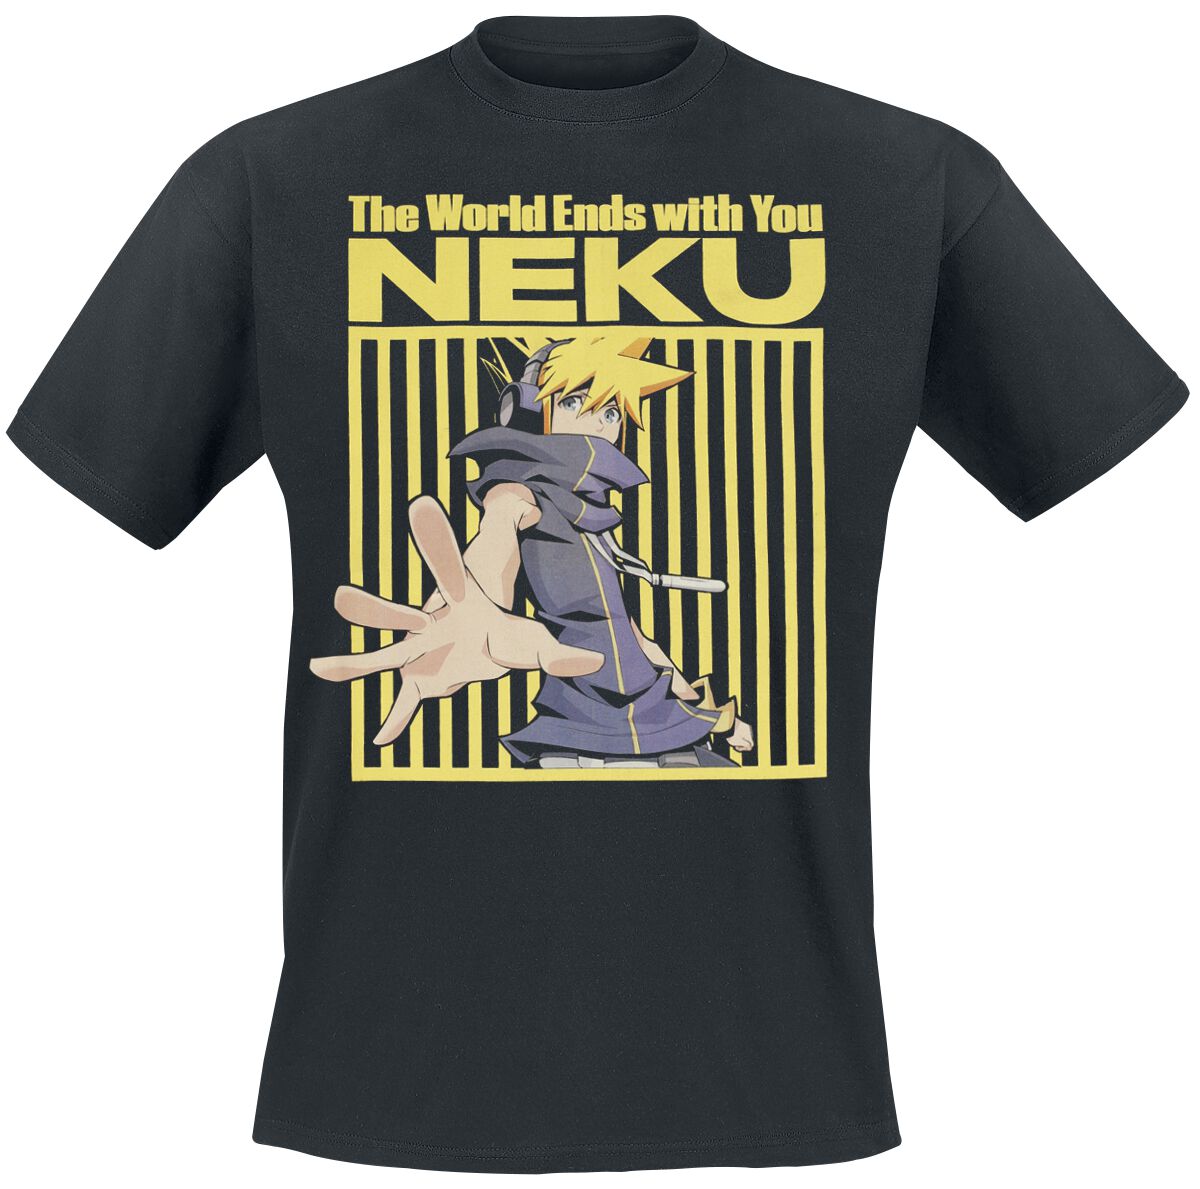 The World Ends With You Neku T-Shirt schwarz in M